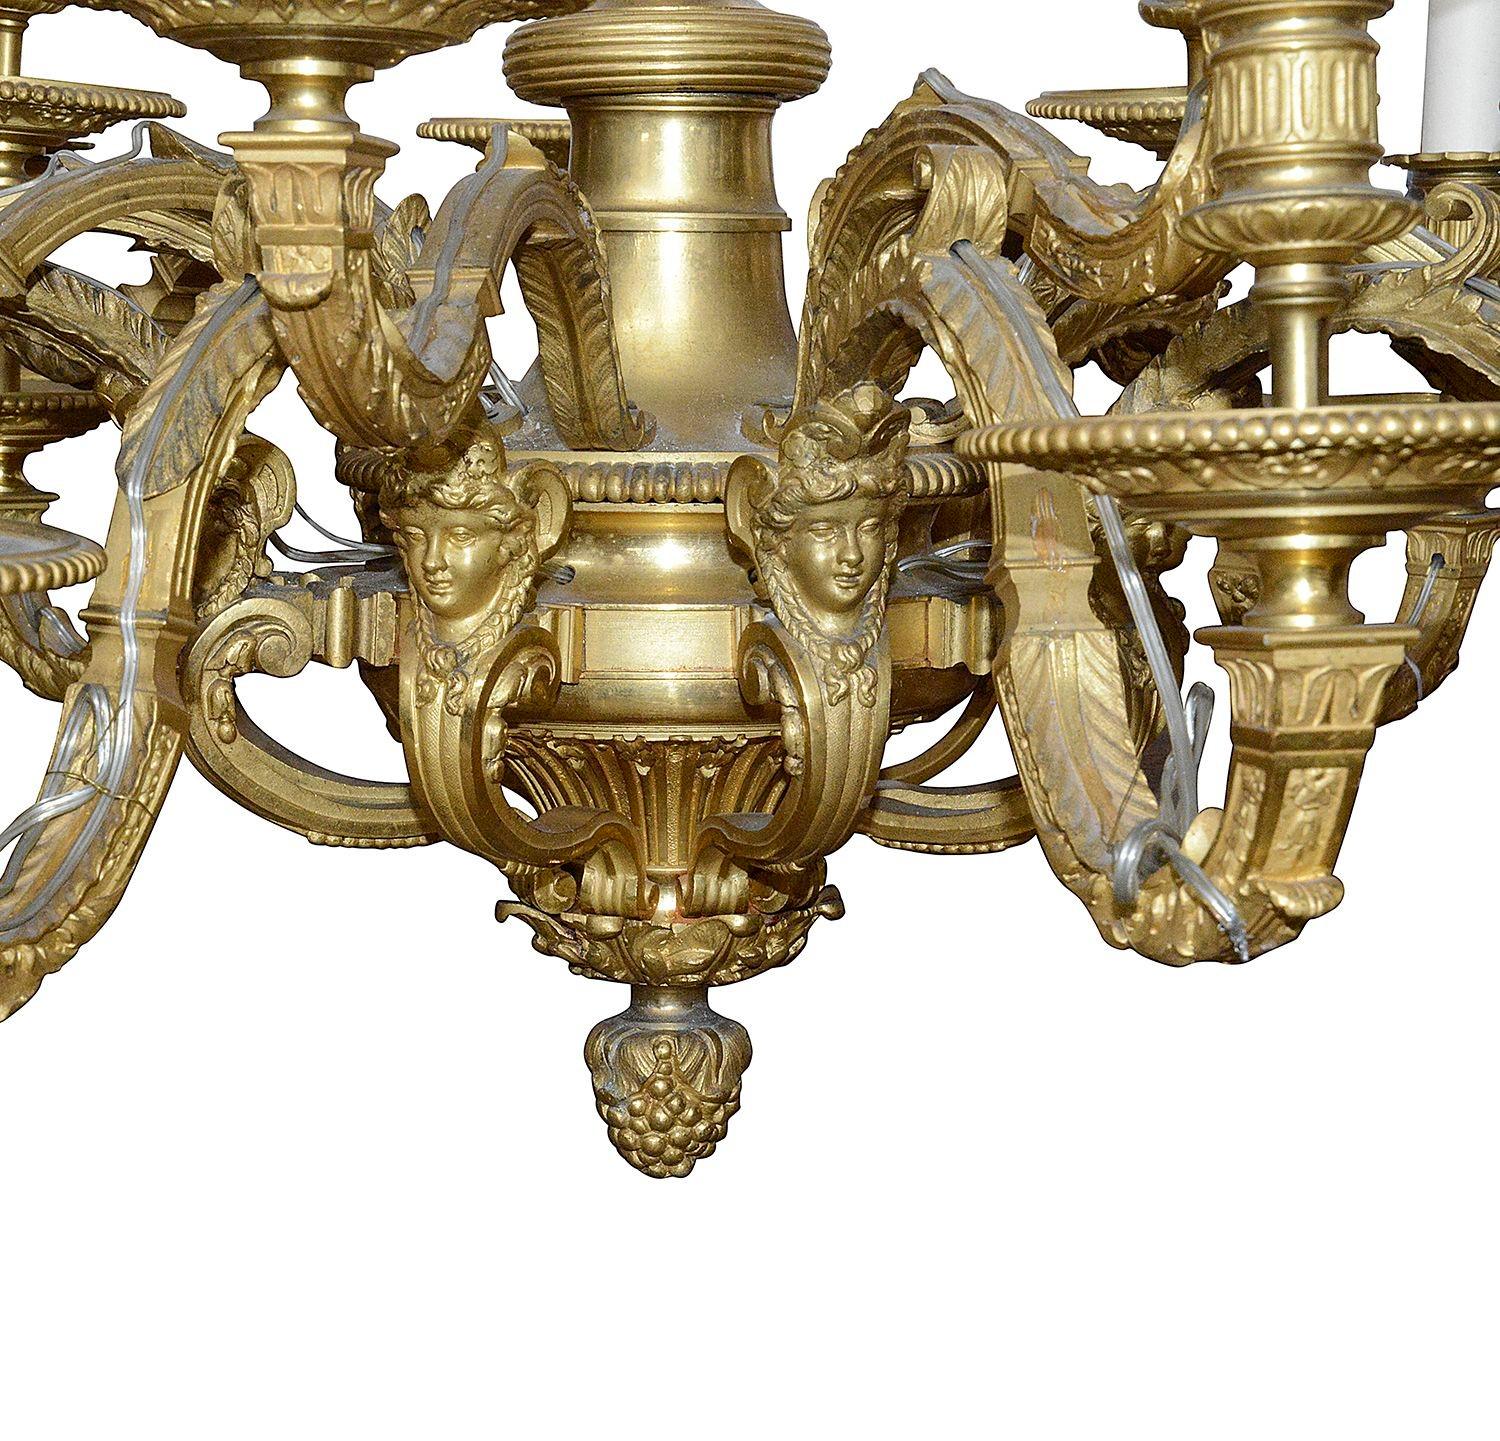 A very impressive 19th Century gilded ormolu Louis XVI style 18 branch chandelier, having classical monopodia mounts to the central column.

Batch 74